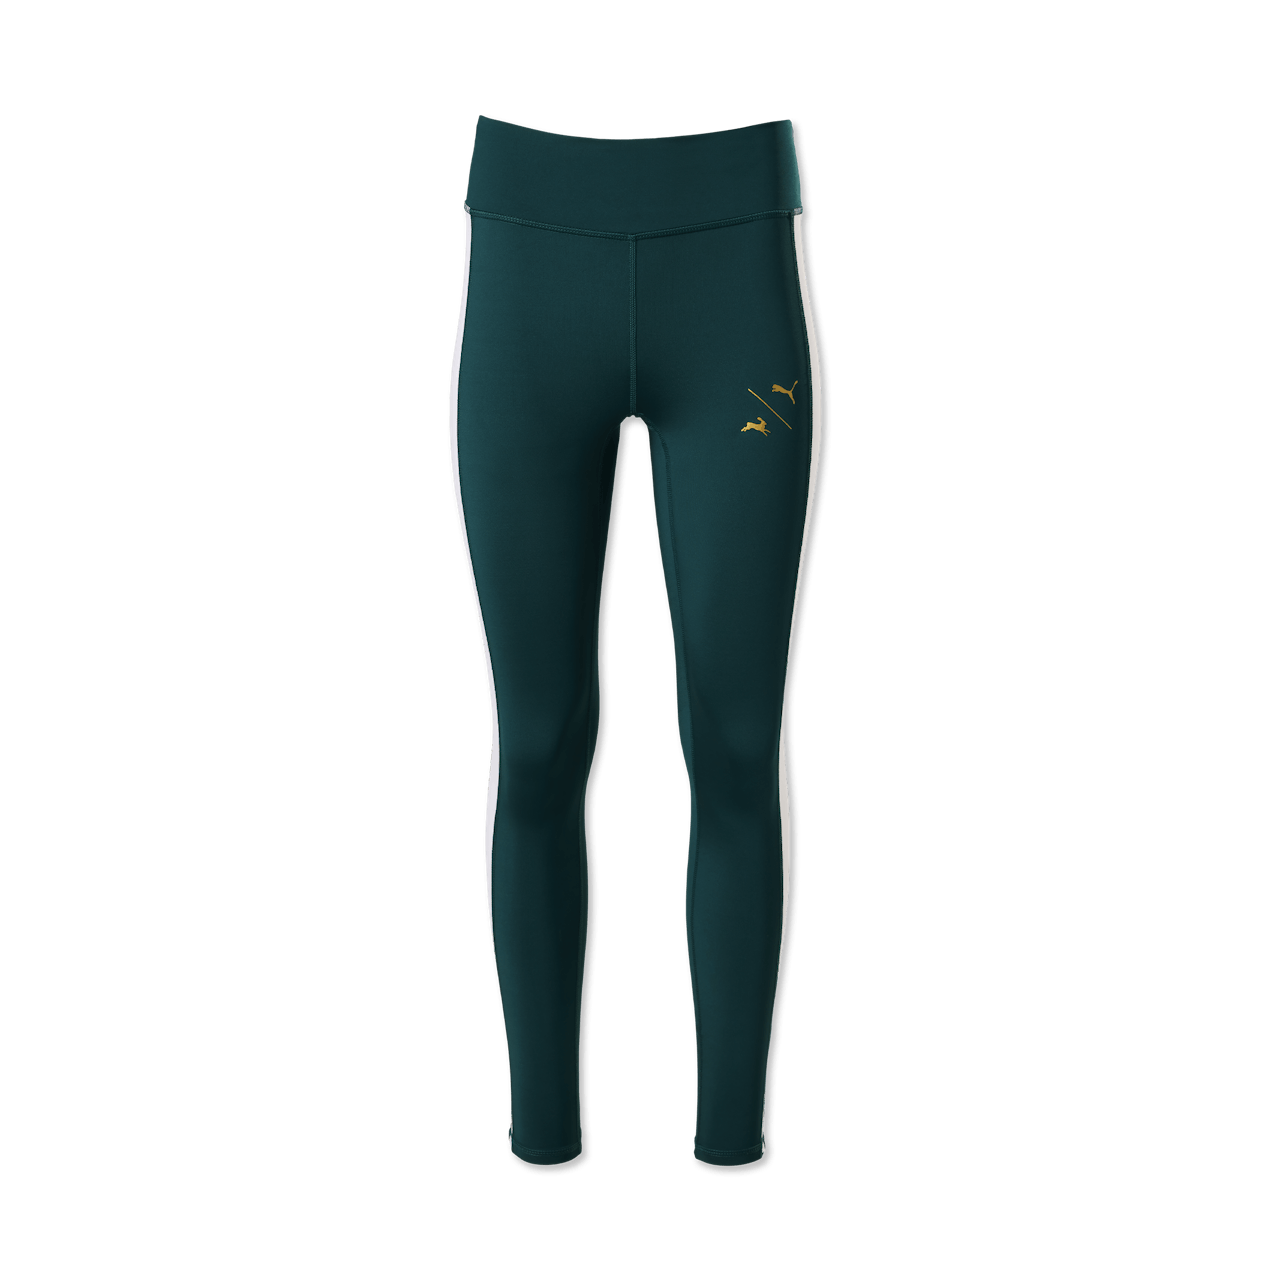 USA Olympic Style Ankle Length Leggings - Fashion Outlet NYC